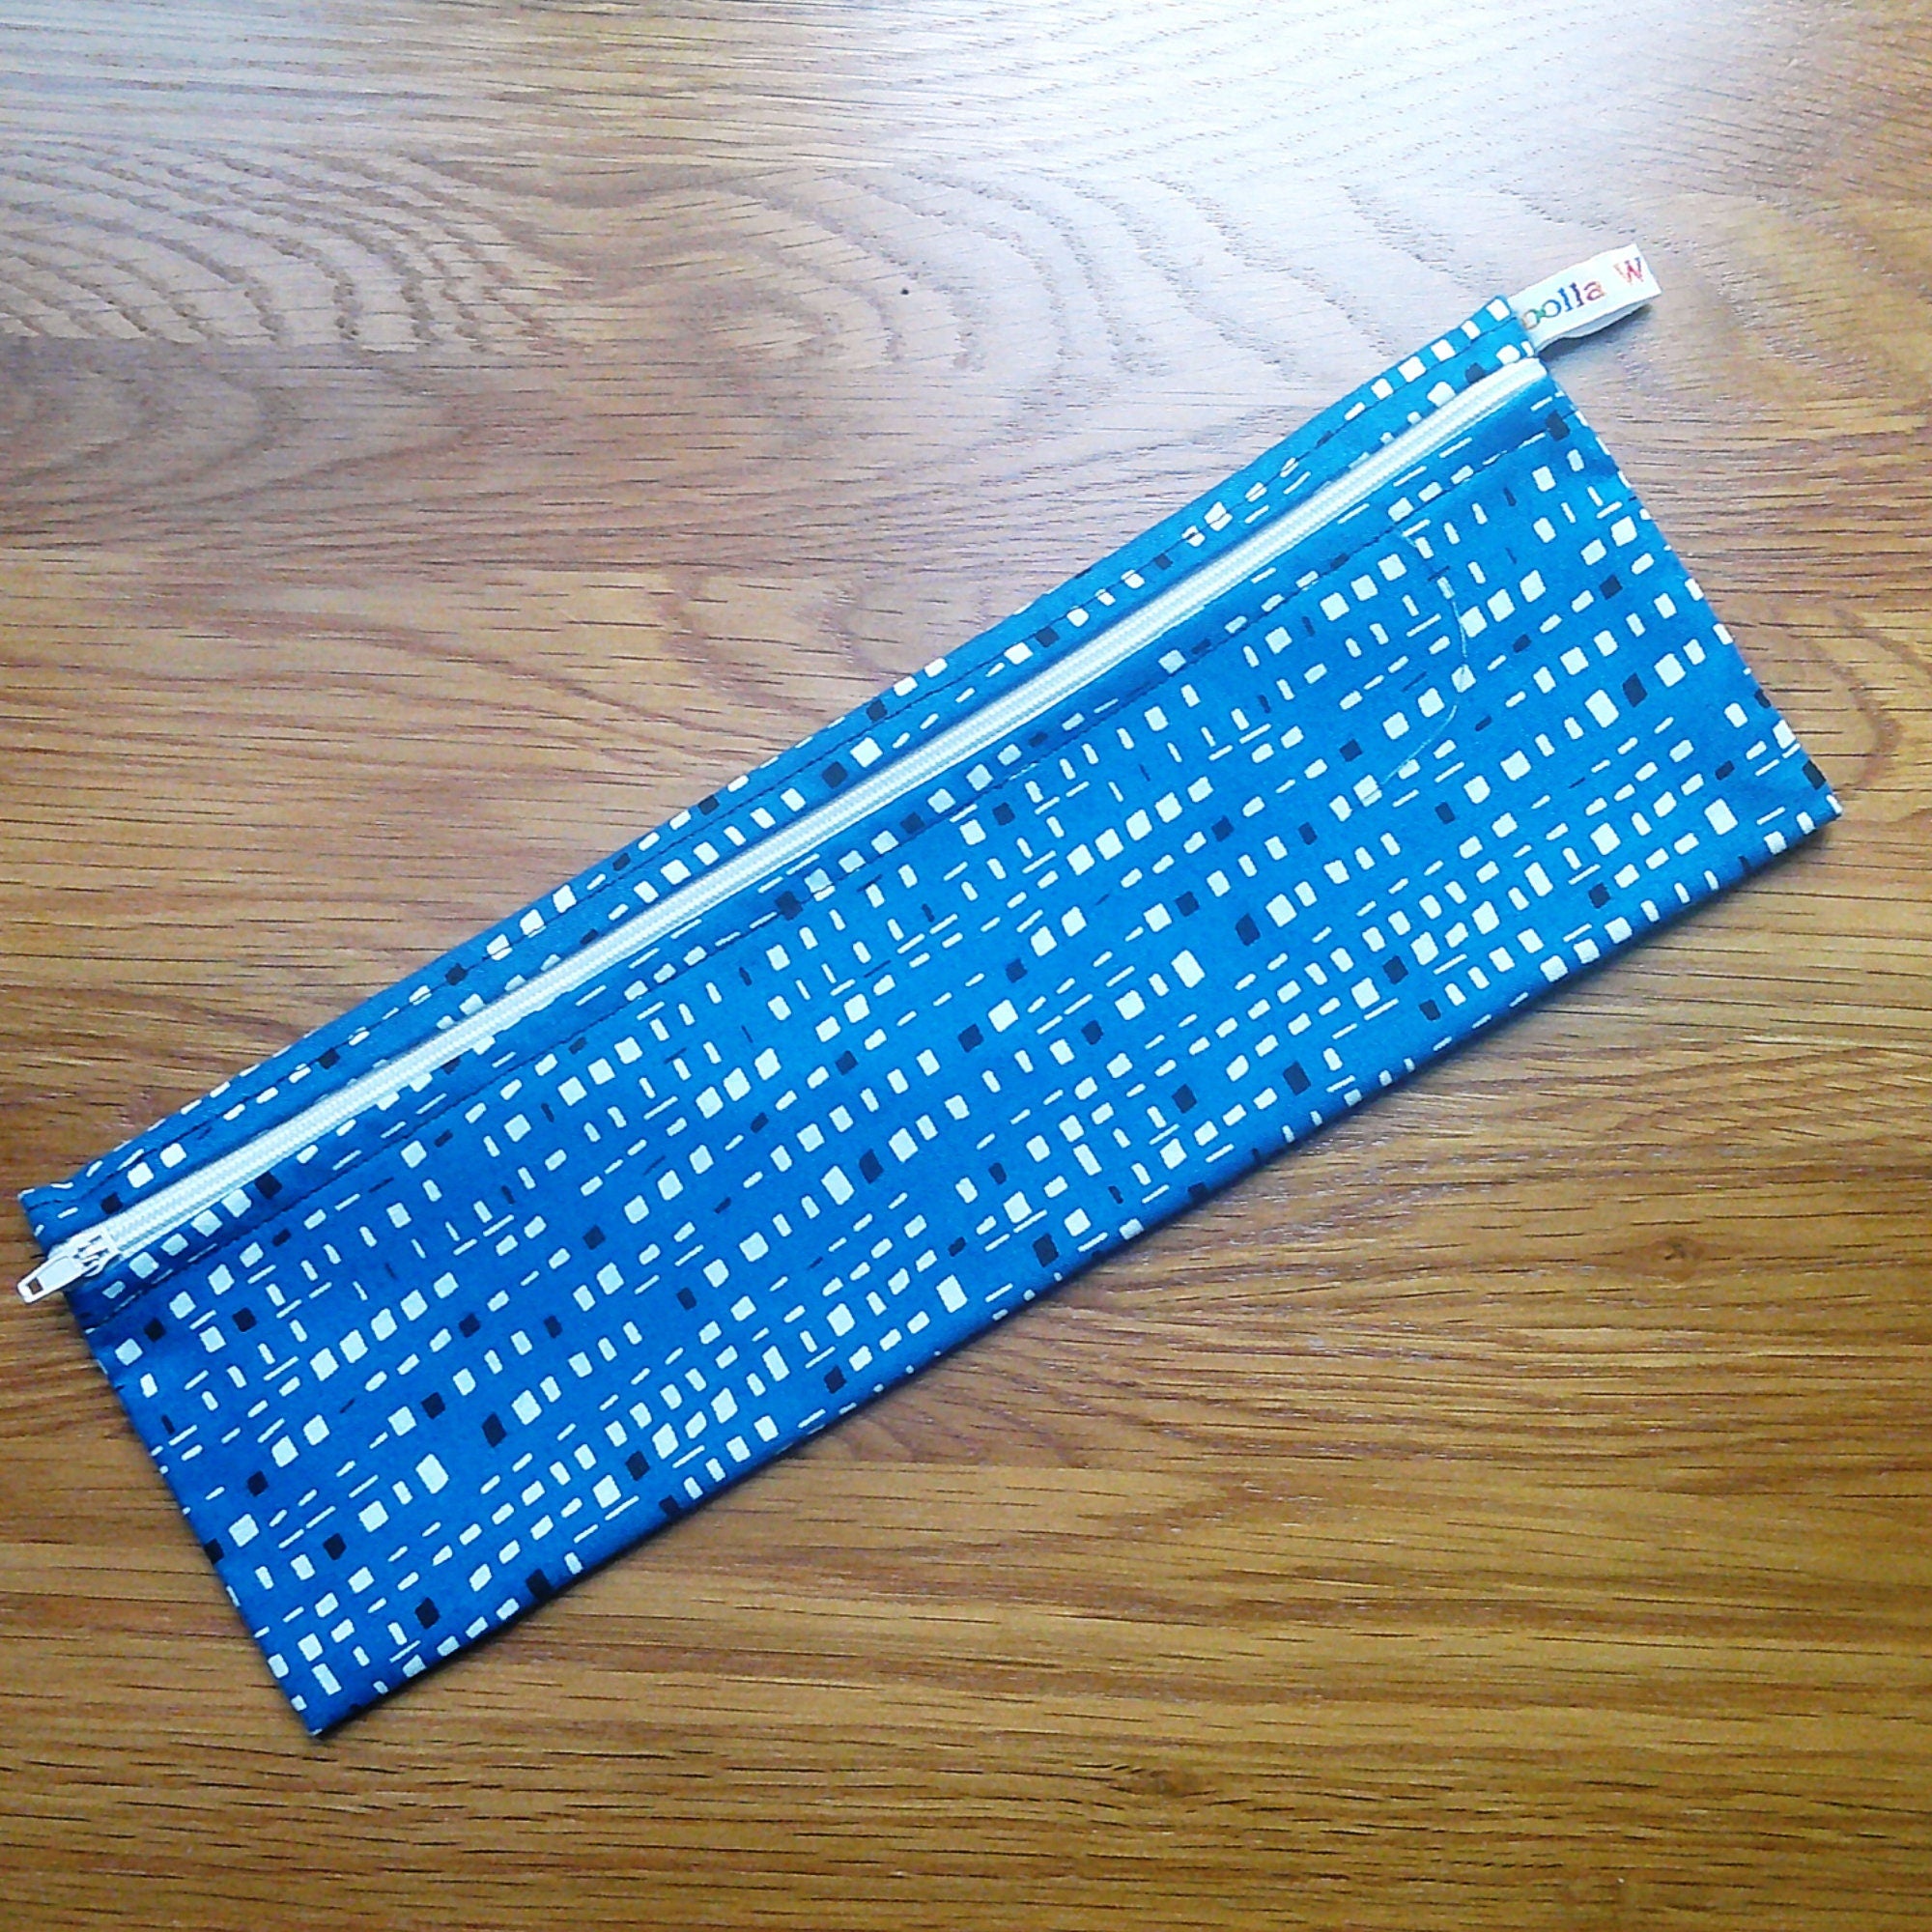 Straw Cutlery Pouch Extra Large, Toothbrush case, Pencil Bag, Crochet Hook Zip Pouch, Chopstick Case Picnic Work Lunch Eco Blue Squares